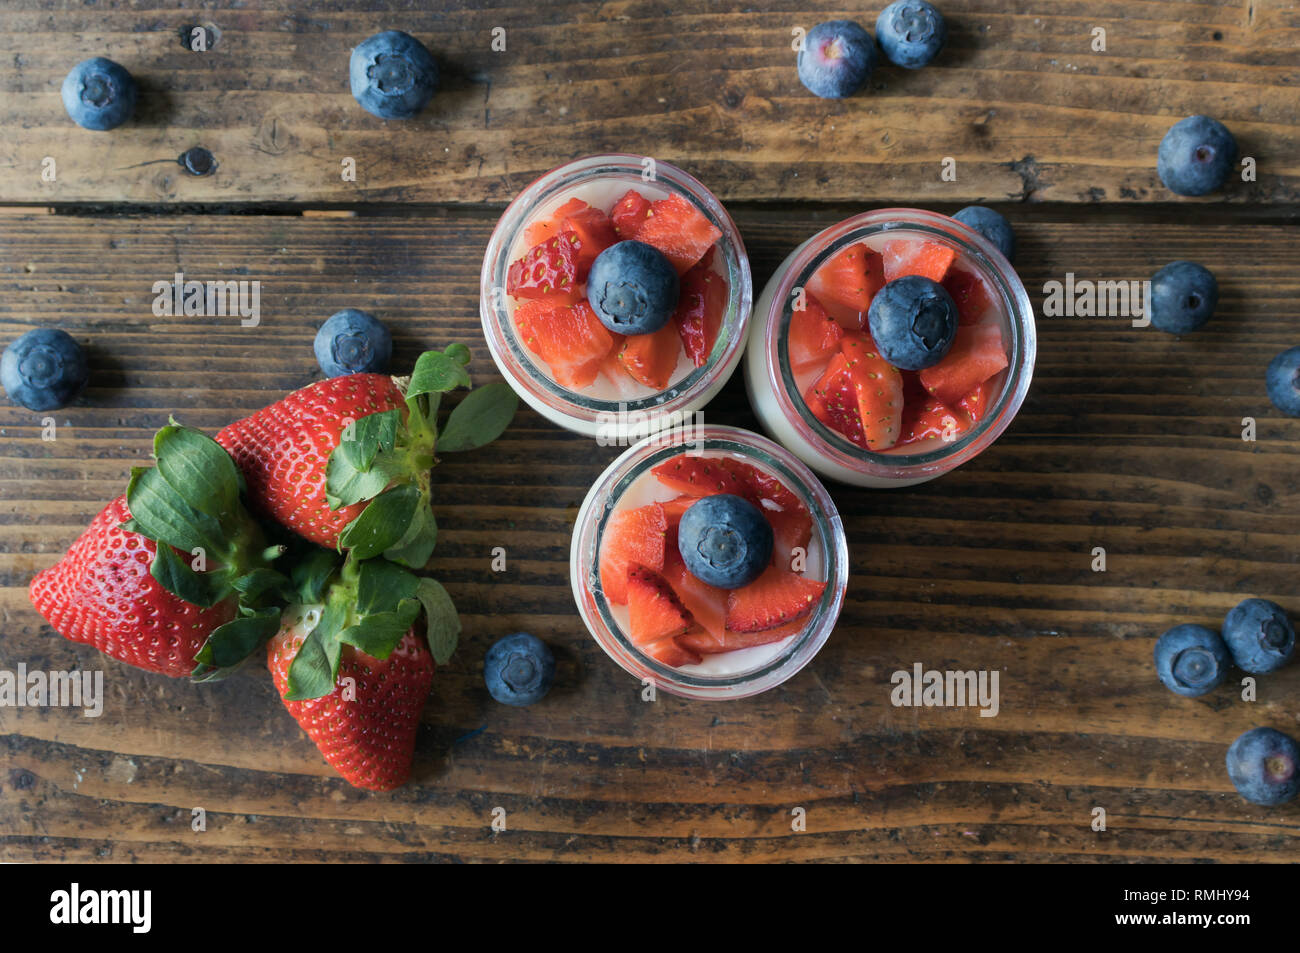 Homemade strawberry yogurt with jam and pieces of fruit on a wooden board. View from above Stock Photo